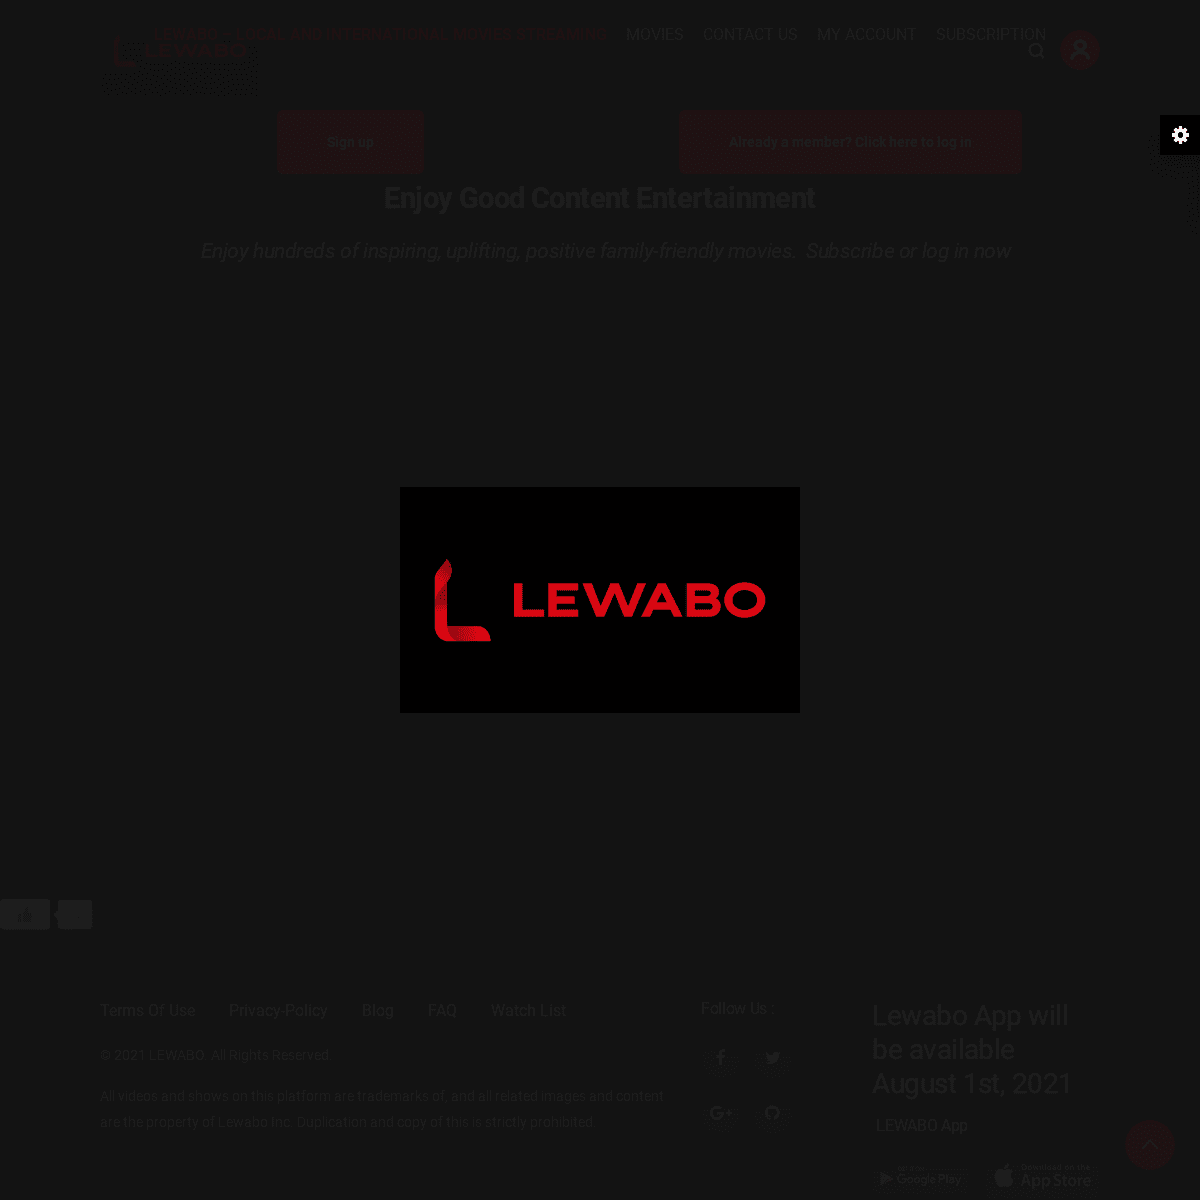 A complete backup of https://lewabo.org